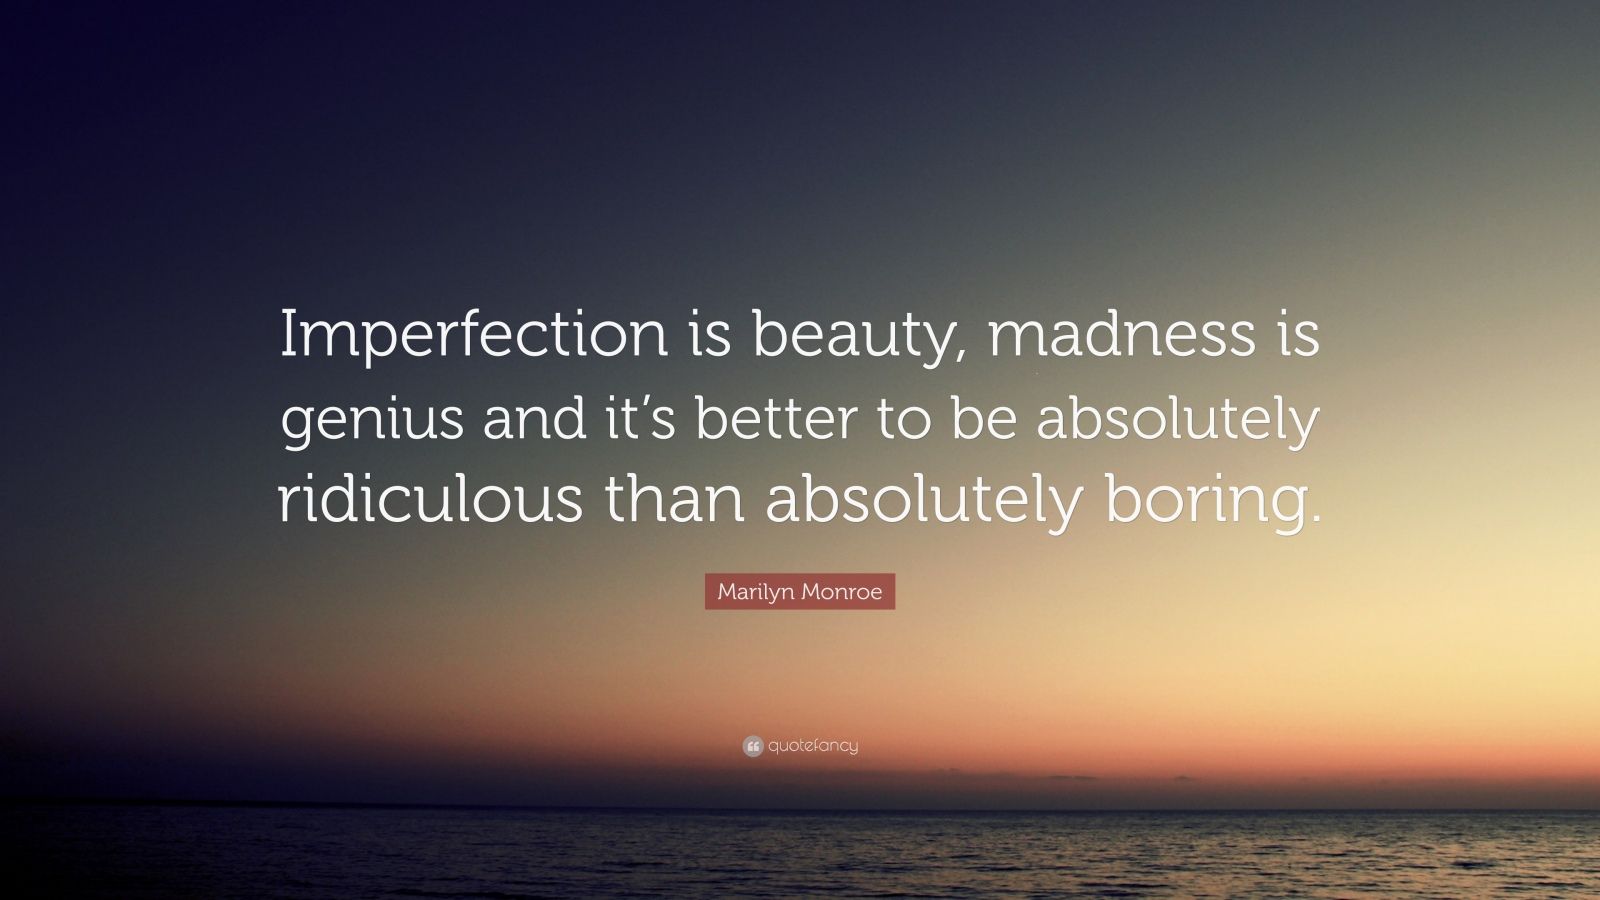 Marilyn Monroe Quote: “Imperfection is beauty, madness is genius and it